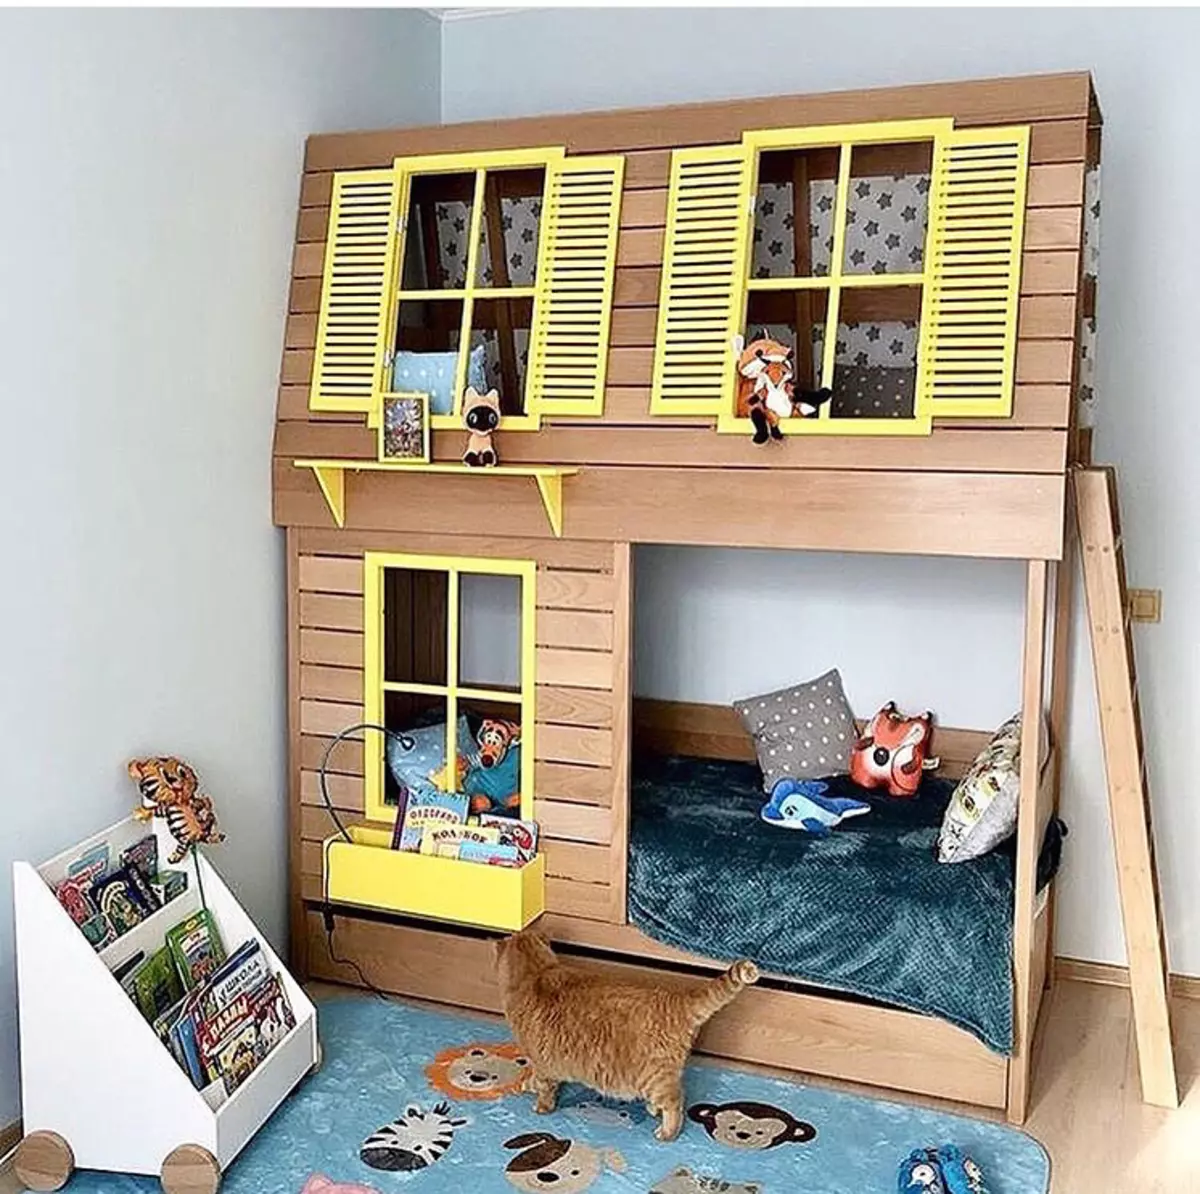 Bunk bed with house.